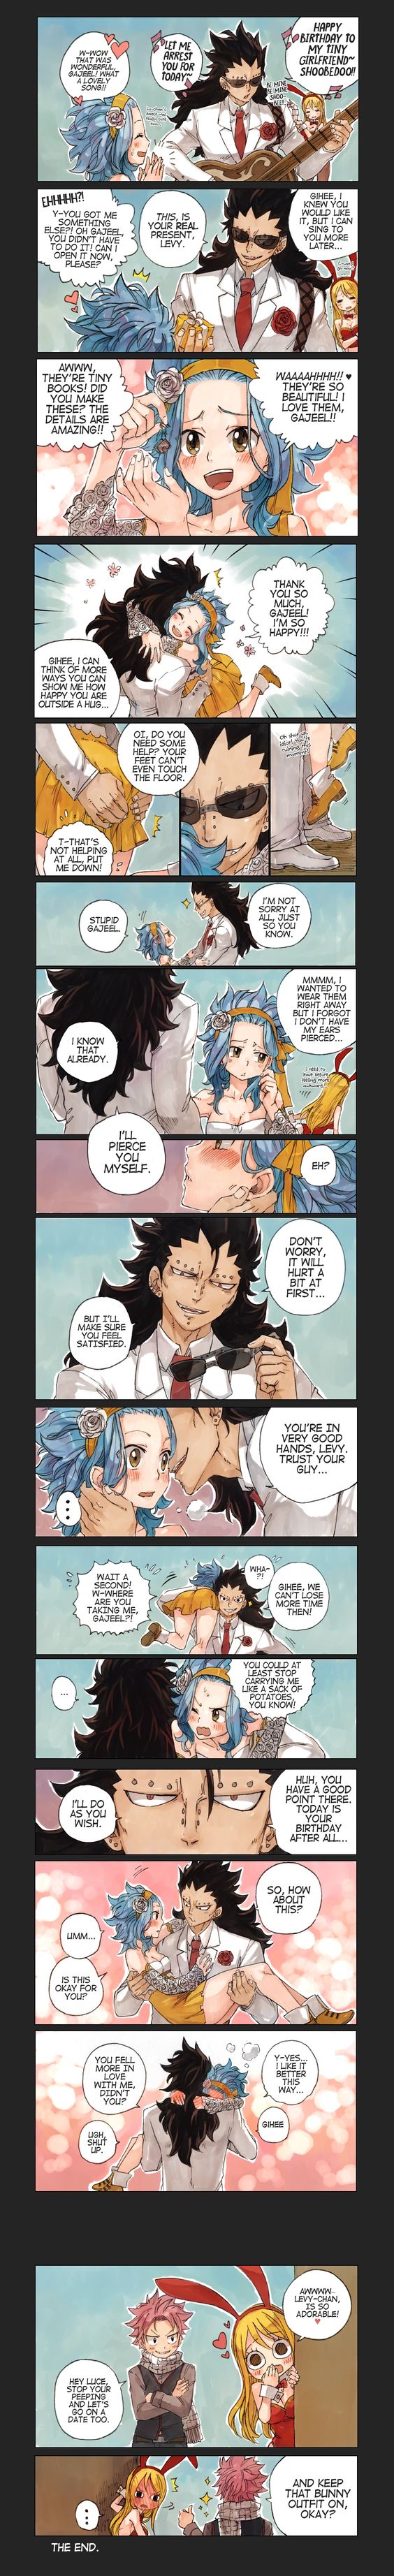 Happy Birthday, Levy Gajeel showing he’s a good boyfriend, even got Lucy to “help”. Isn’t he so charming? Hehehe. Made by Rboz | Sketchy ✖ Flavor